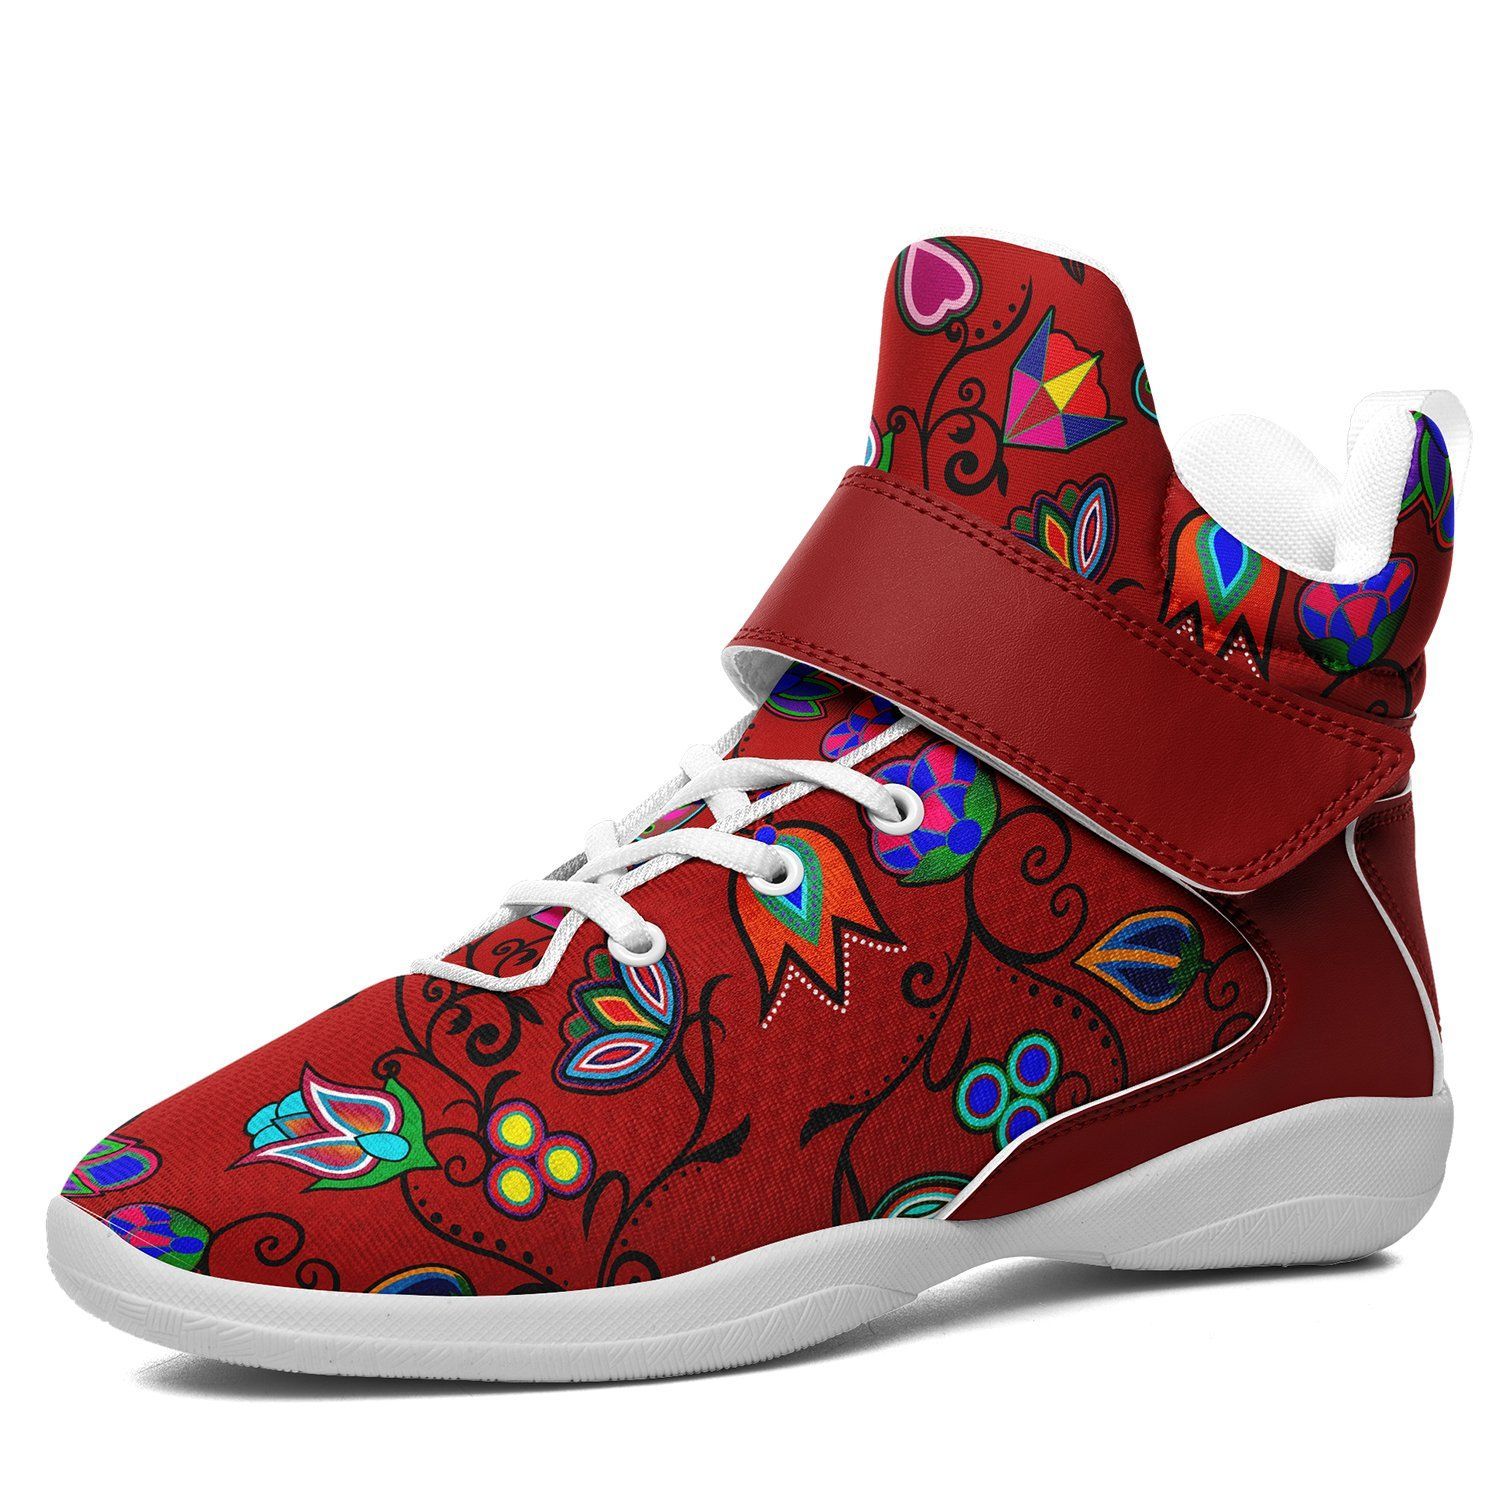 Indigenous Paisley Dahlia Ipottaa Basketball / Sport High Top Shoes - White Sole 49 Dzine US Men 7 / EUR 40 White Sole with Dark Red Strap 